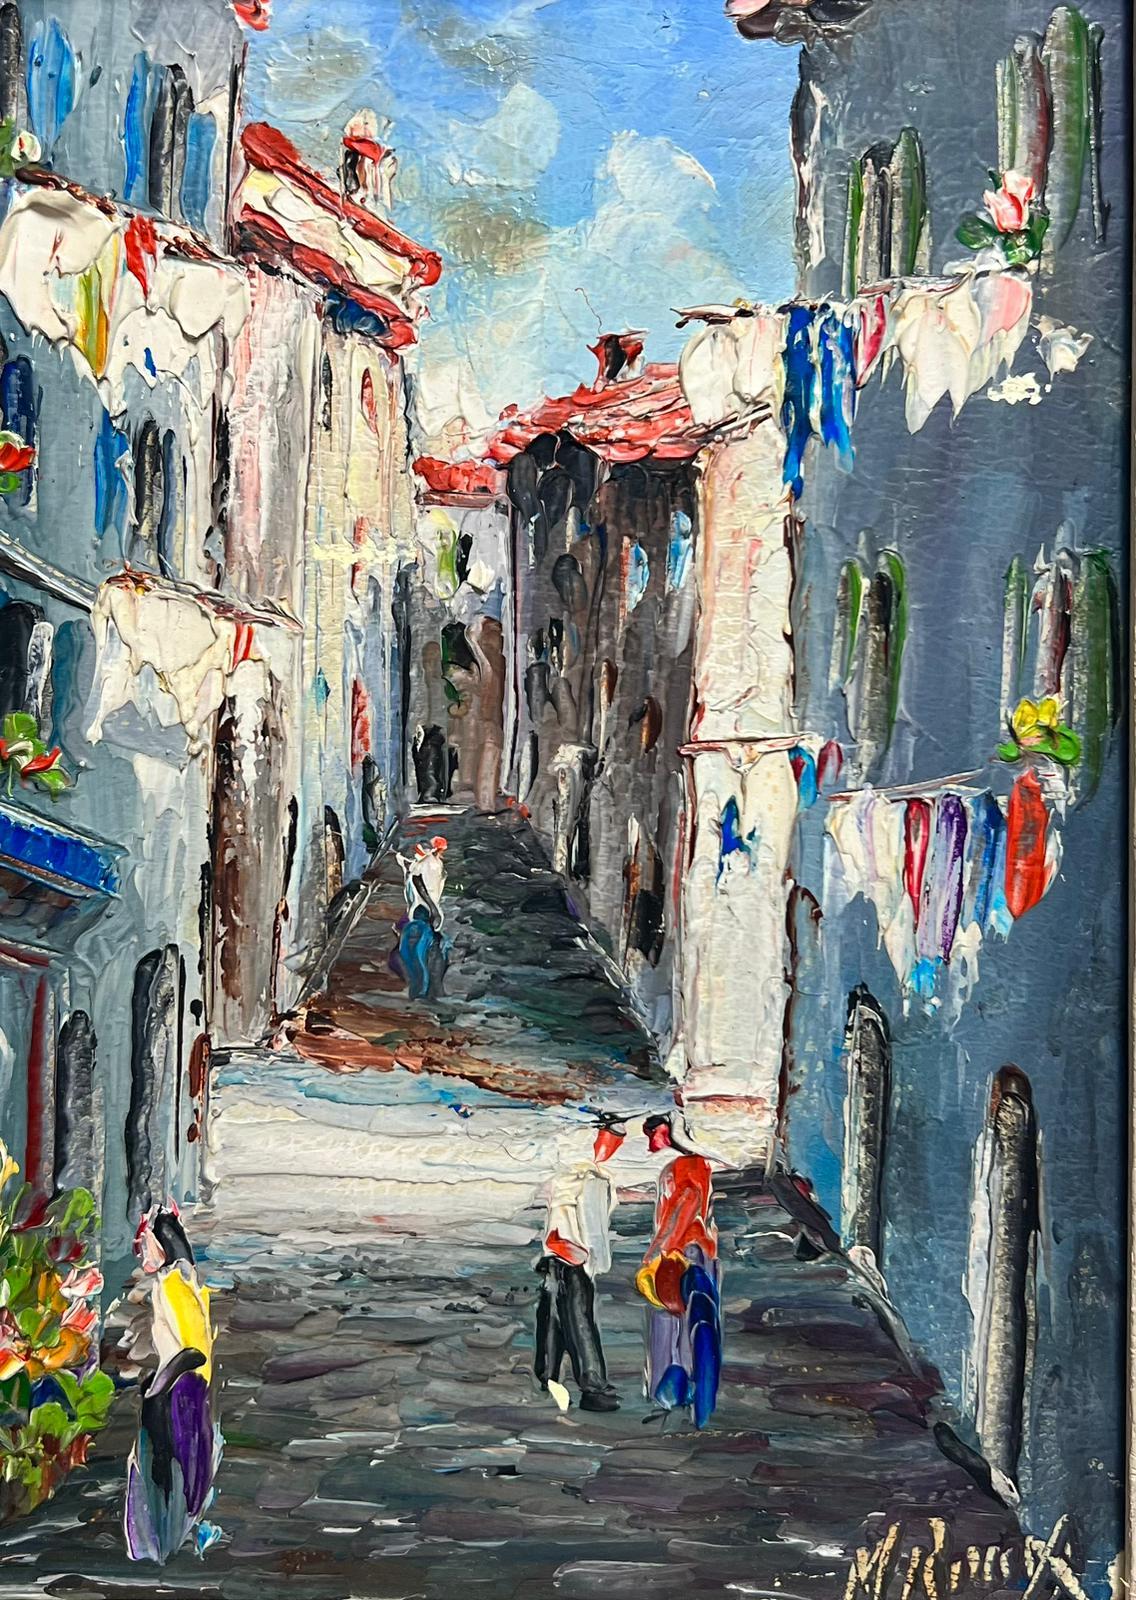 The Old Street, Nice
French School, mid 20th century
signed oil painting on board, framed
inscribed verso
framed: 8.5 x 6.5 inches
canvas: 7 x 5 inches
provenance: private collection, France
condition: very good and sound condition 
